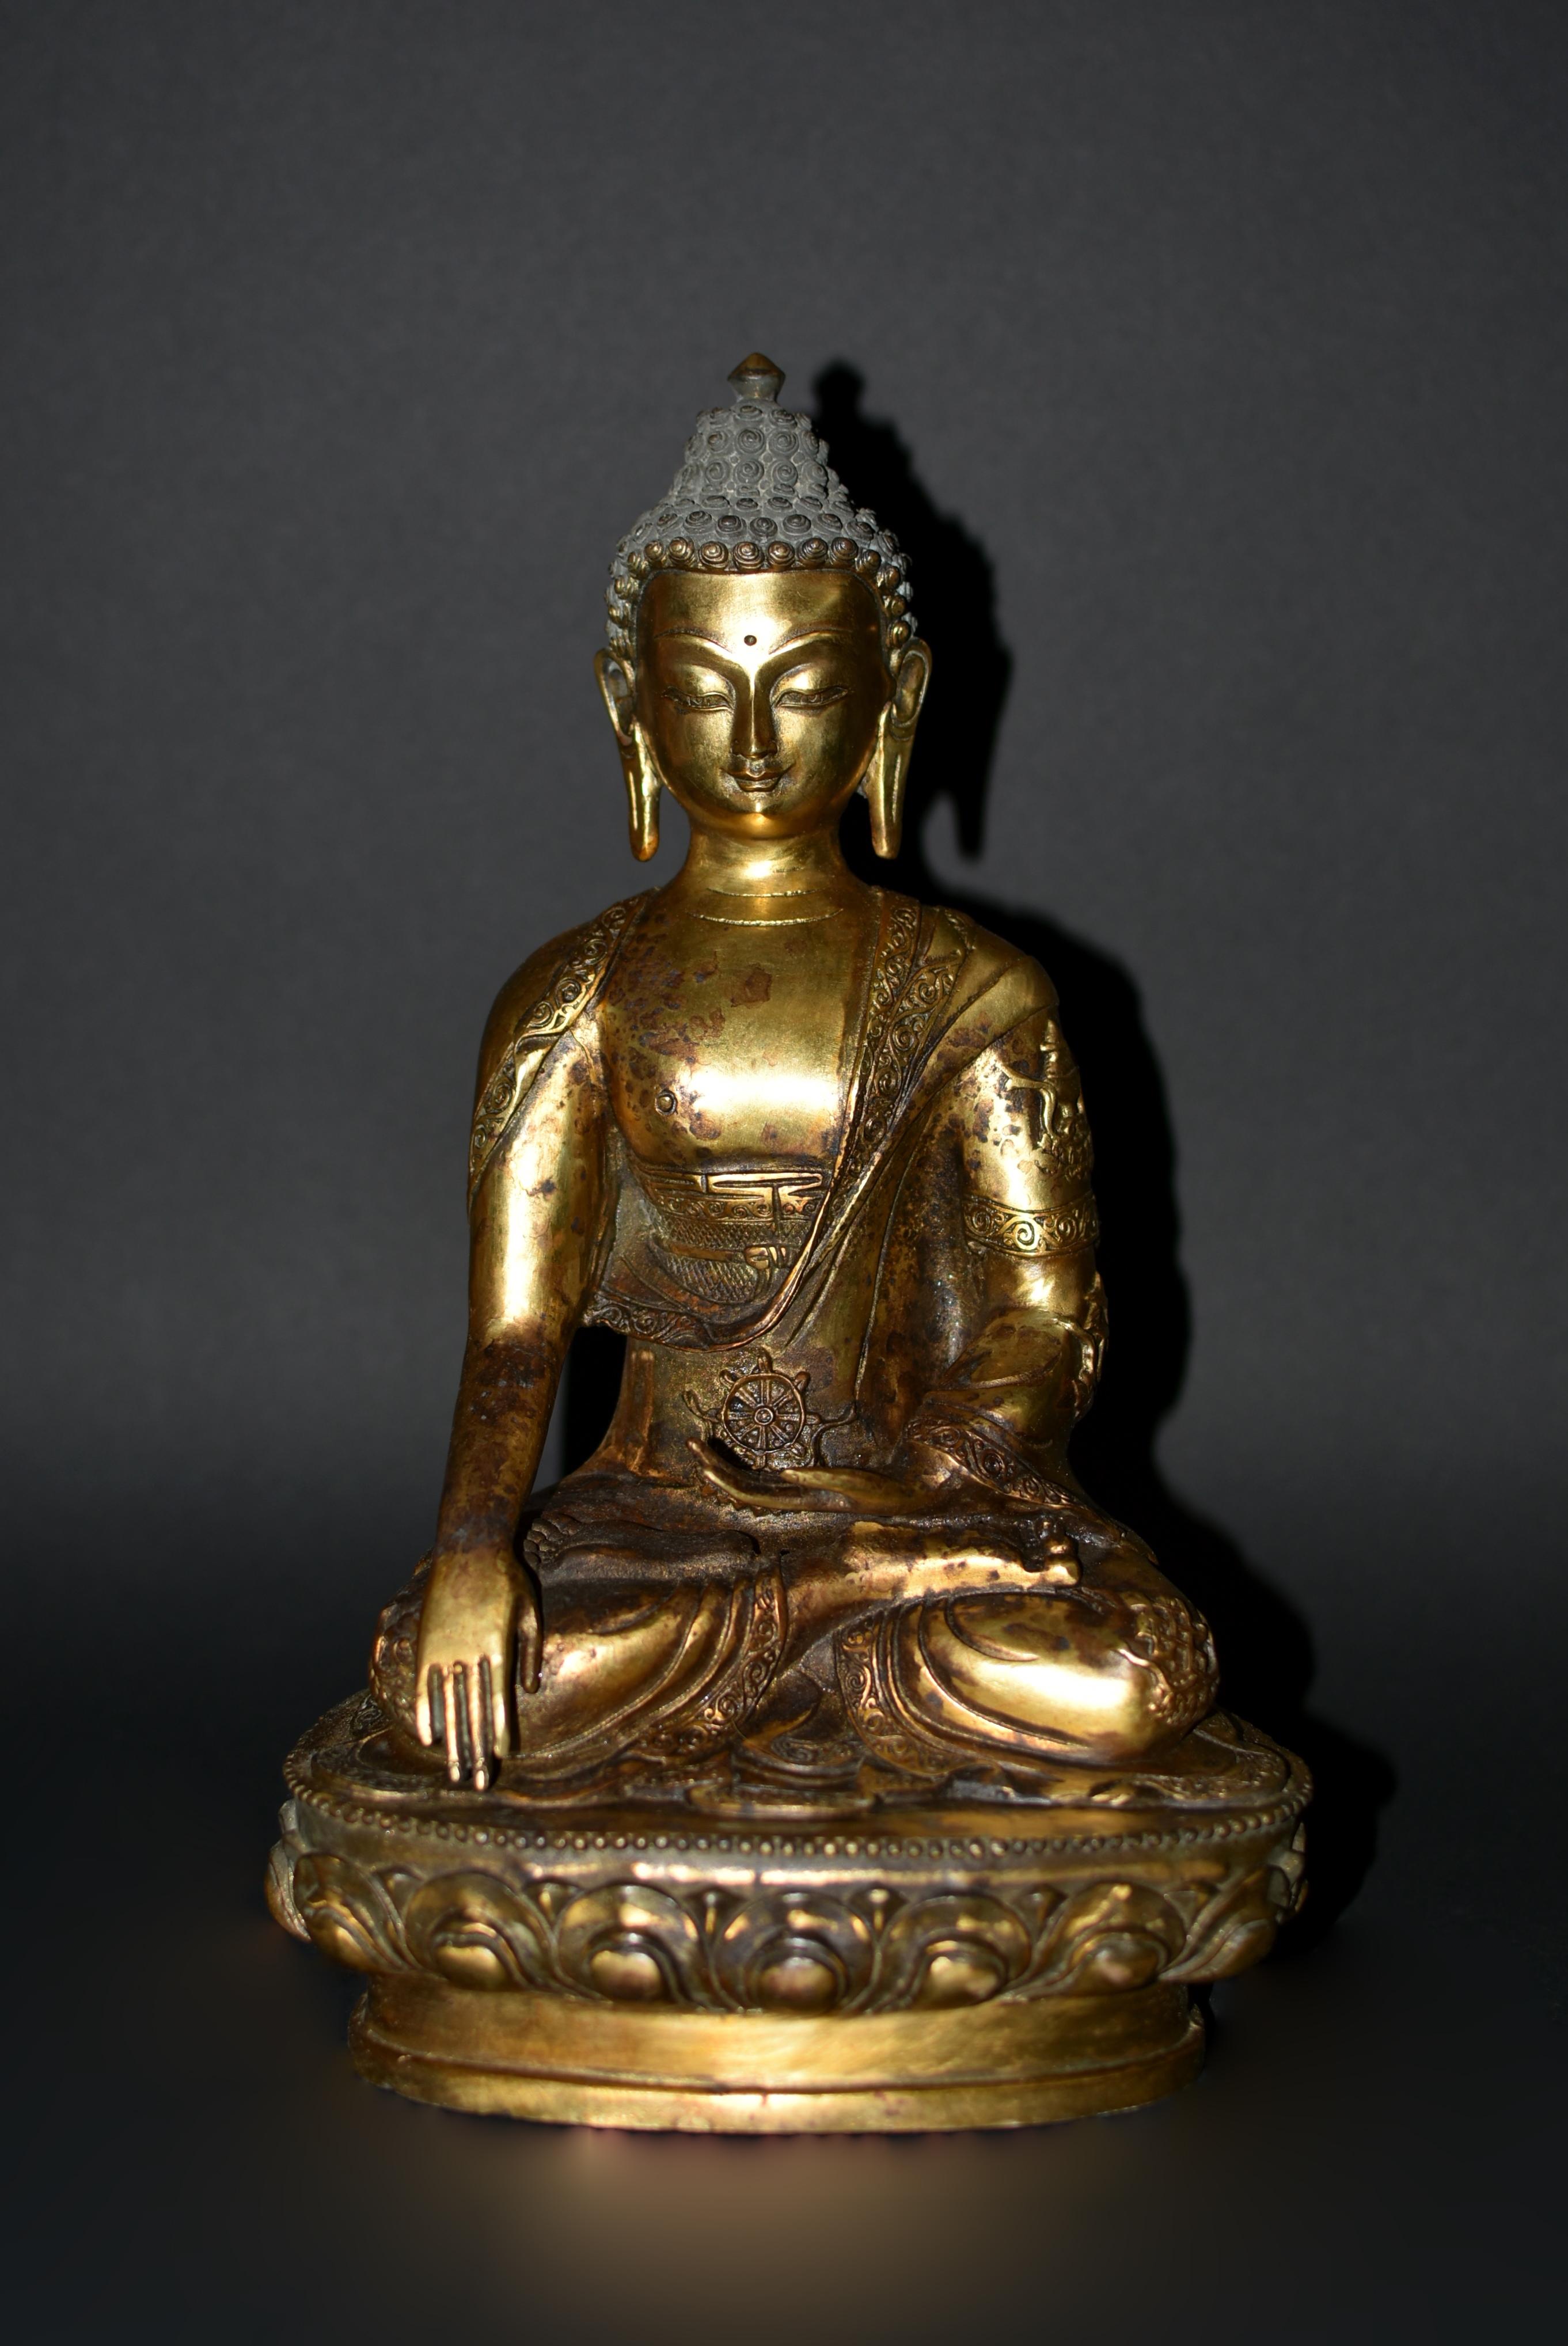 An antique gilt bronze statue of young Buddha Shakyamuni. Seated on a lotus throne in dhyana with his right hand reaching for earth in bhumiparsa mudra, wearing an embroidered robe that wraps around his body and tucked under his legs, exposing his